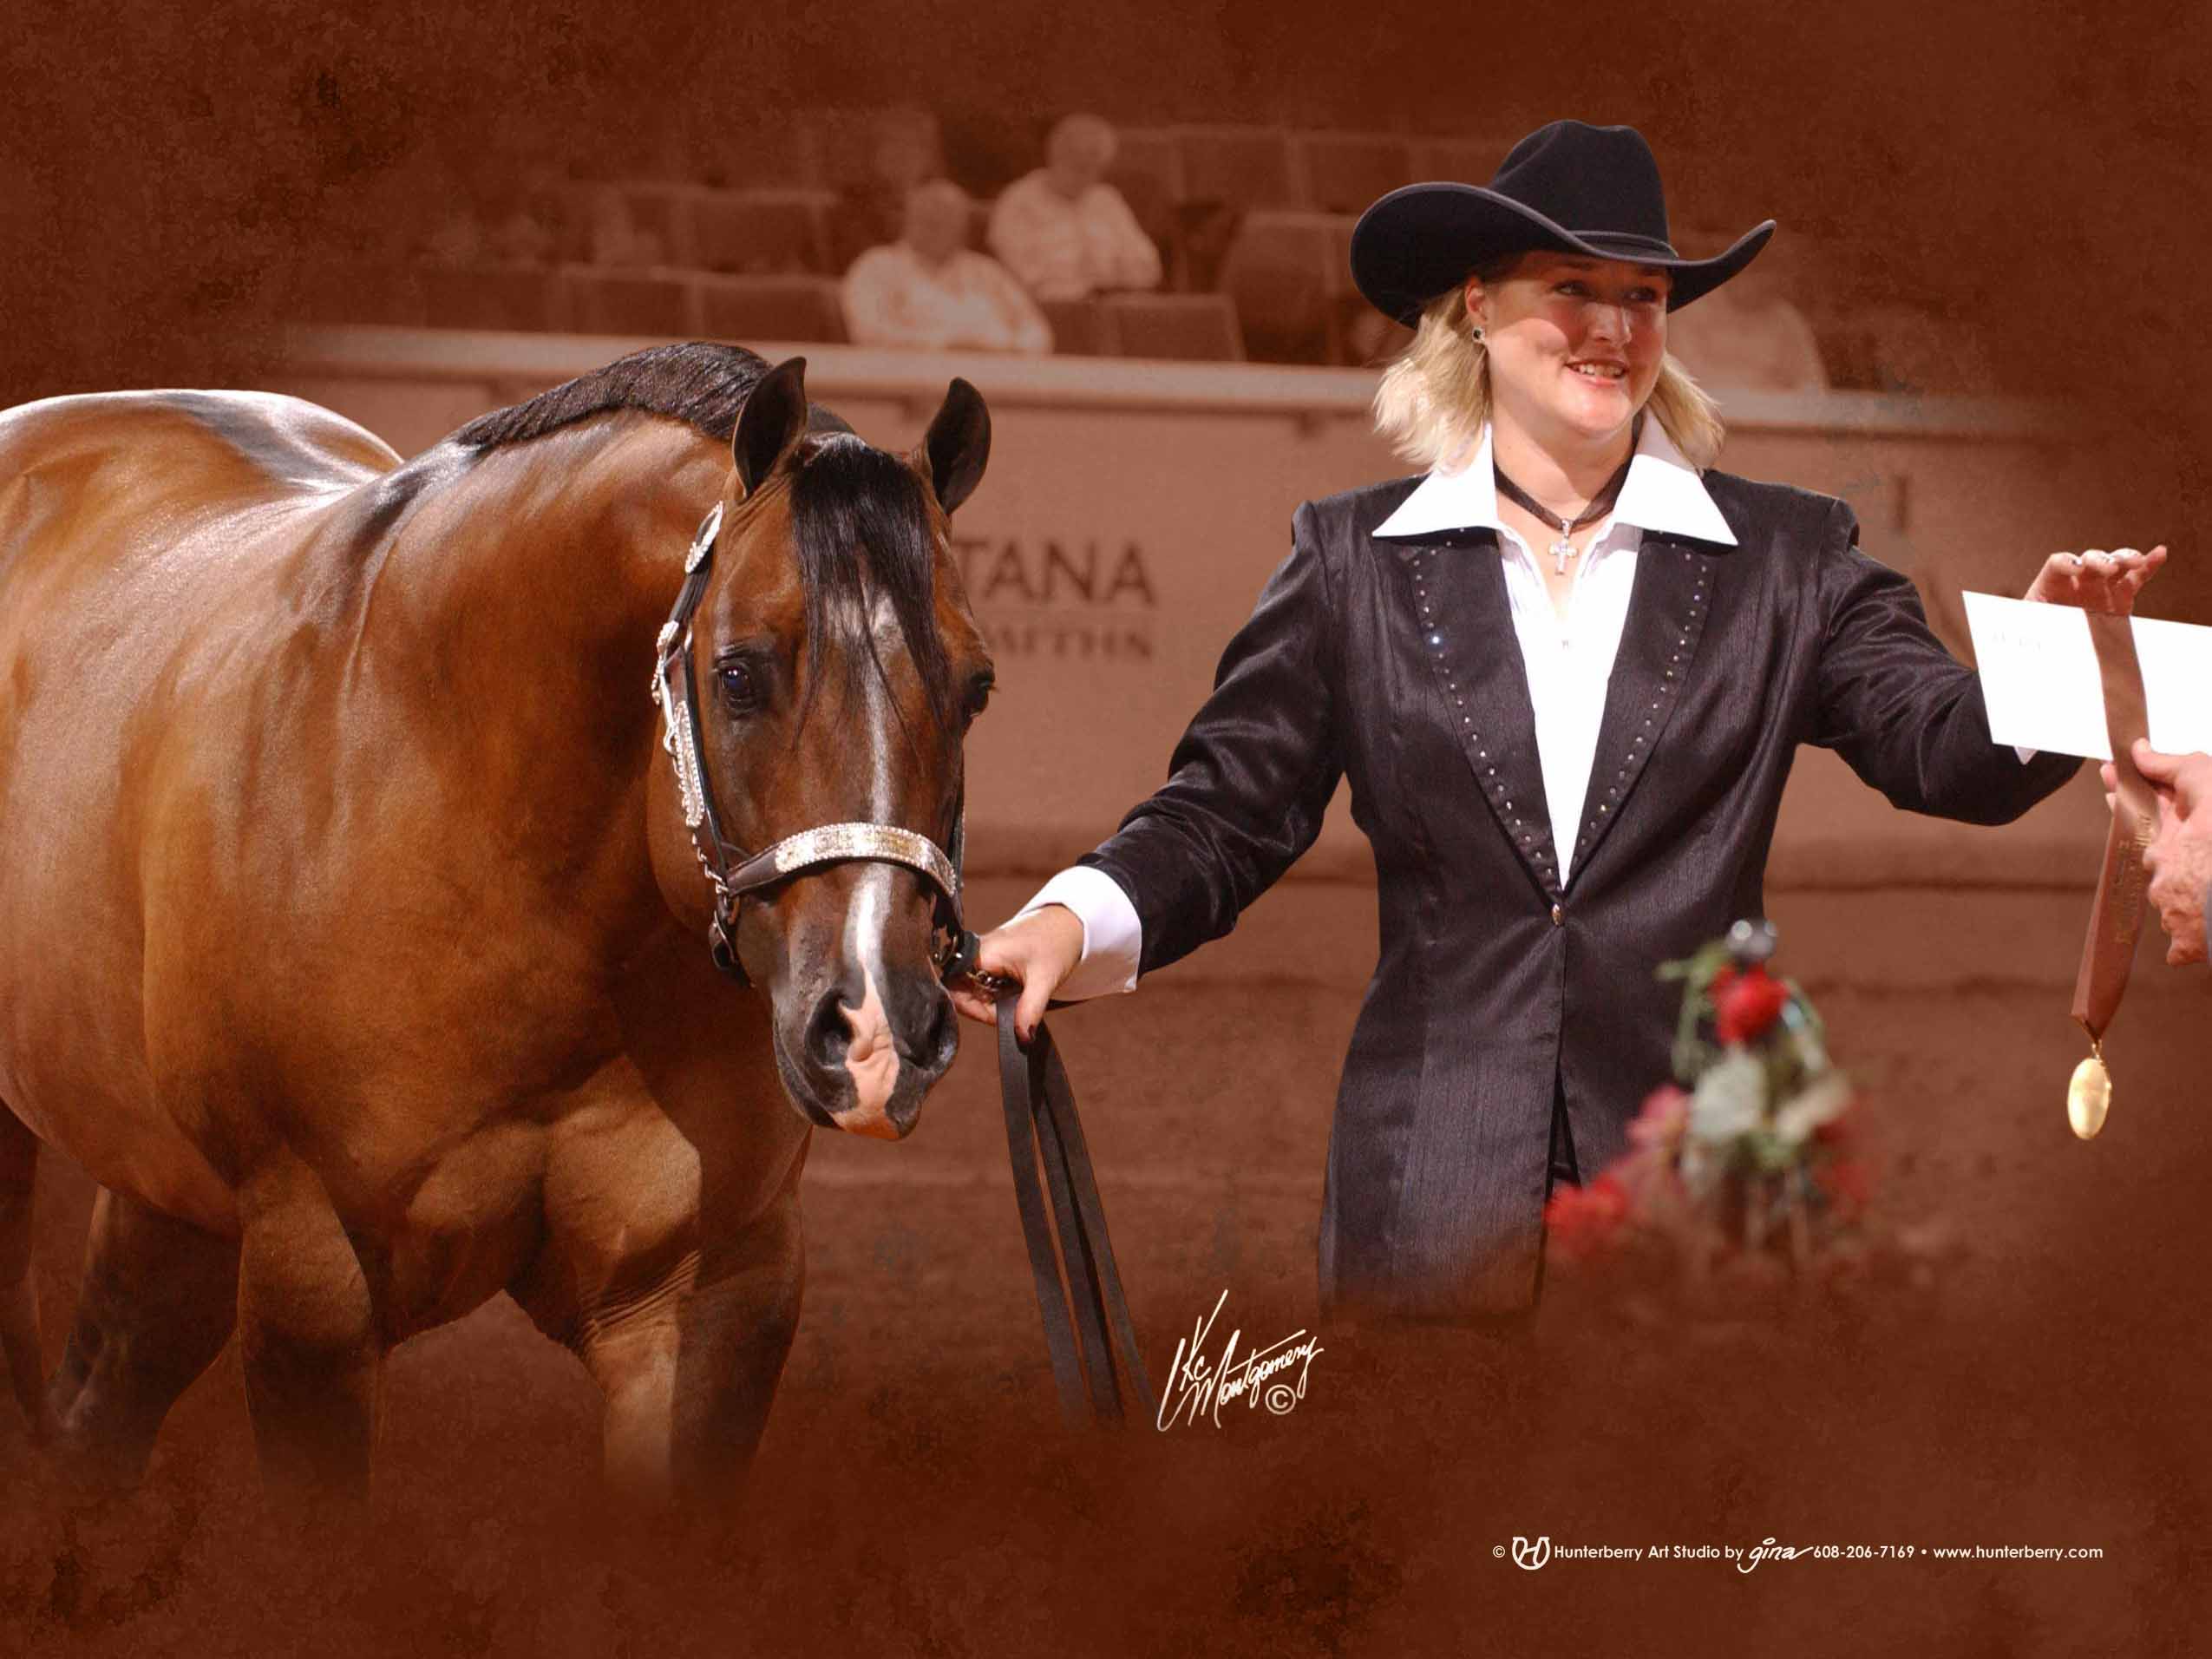 Golden Impact at the 2005 AQHA World Show